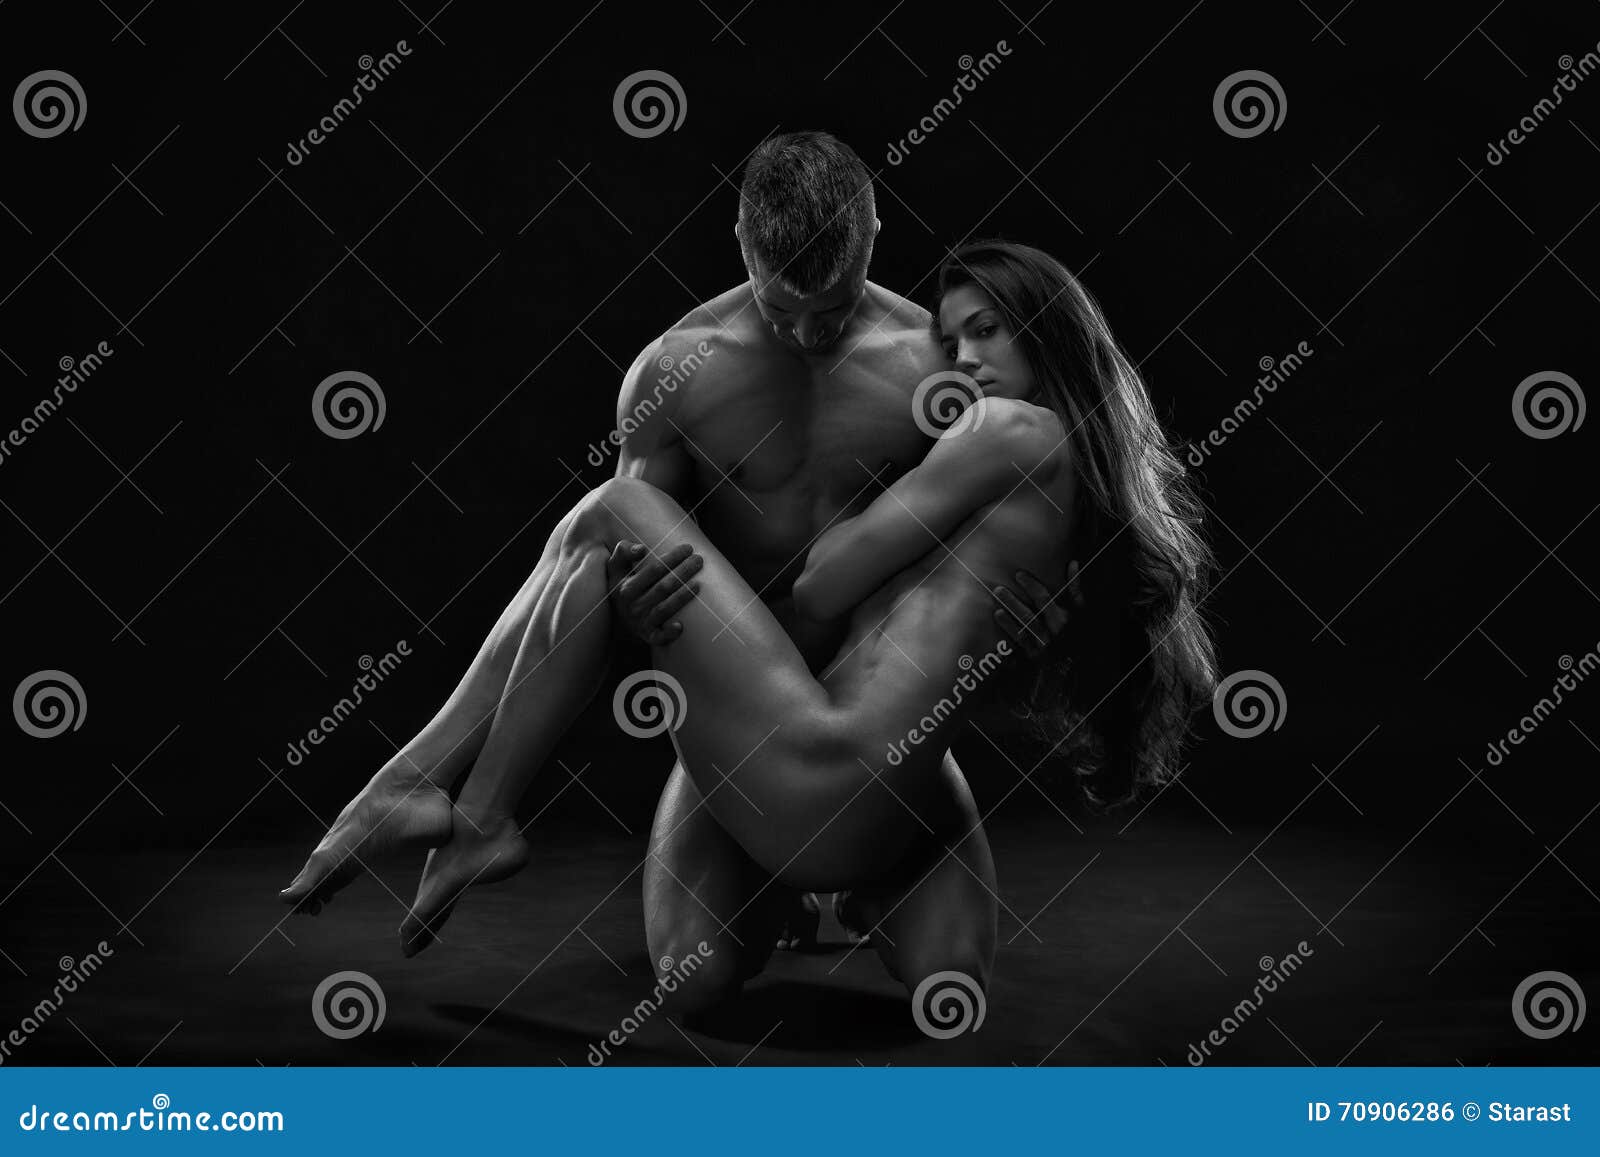 2762 Naked Couple Art Images, Stock Photos & Vectors